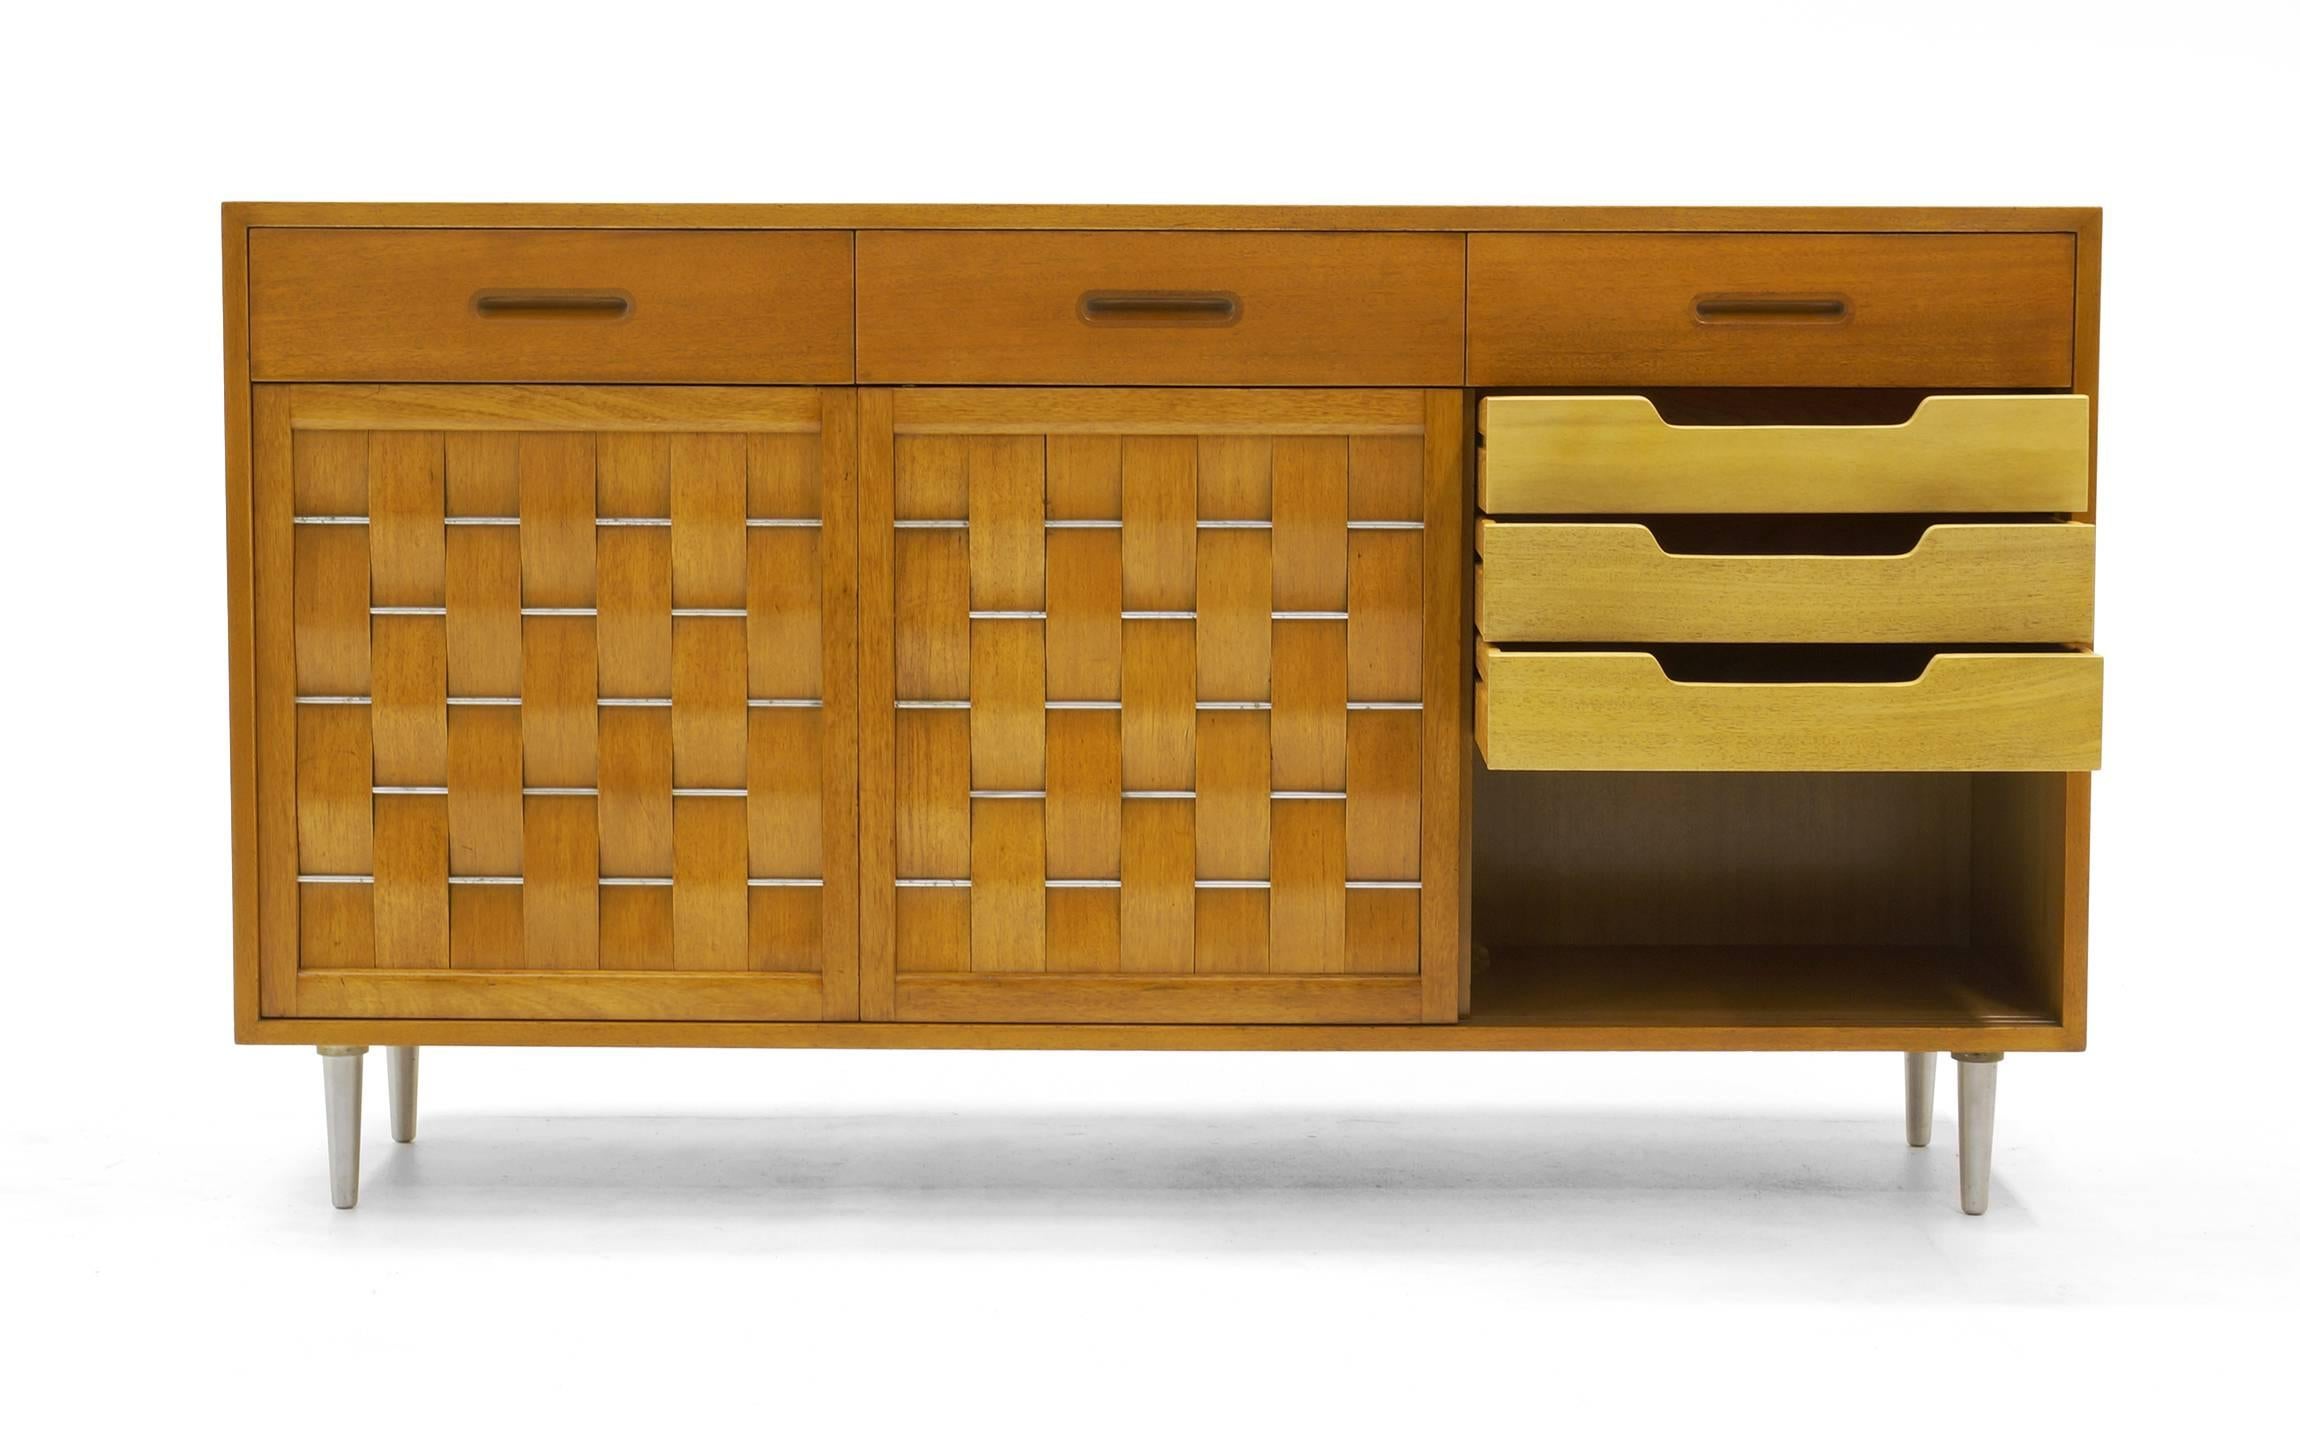 Edward Wormley three-panel woven front credenza/buffet. Bleached African mahogany with solid brushed aluminum conical legs and rods. Expertly restored and refinished.